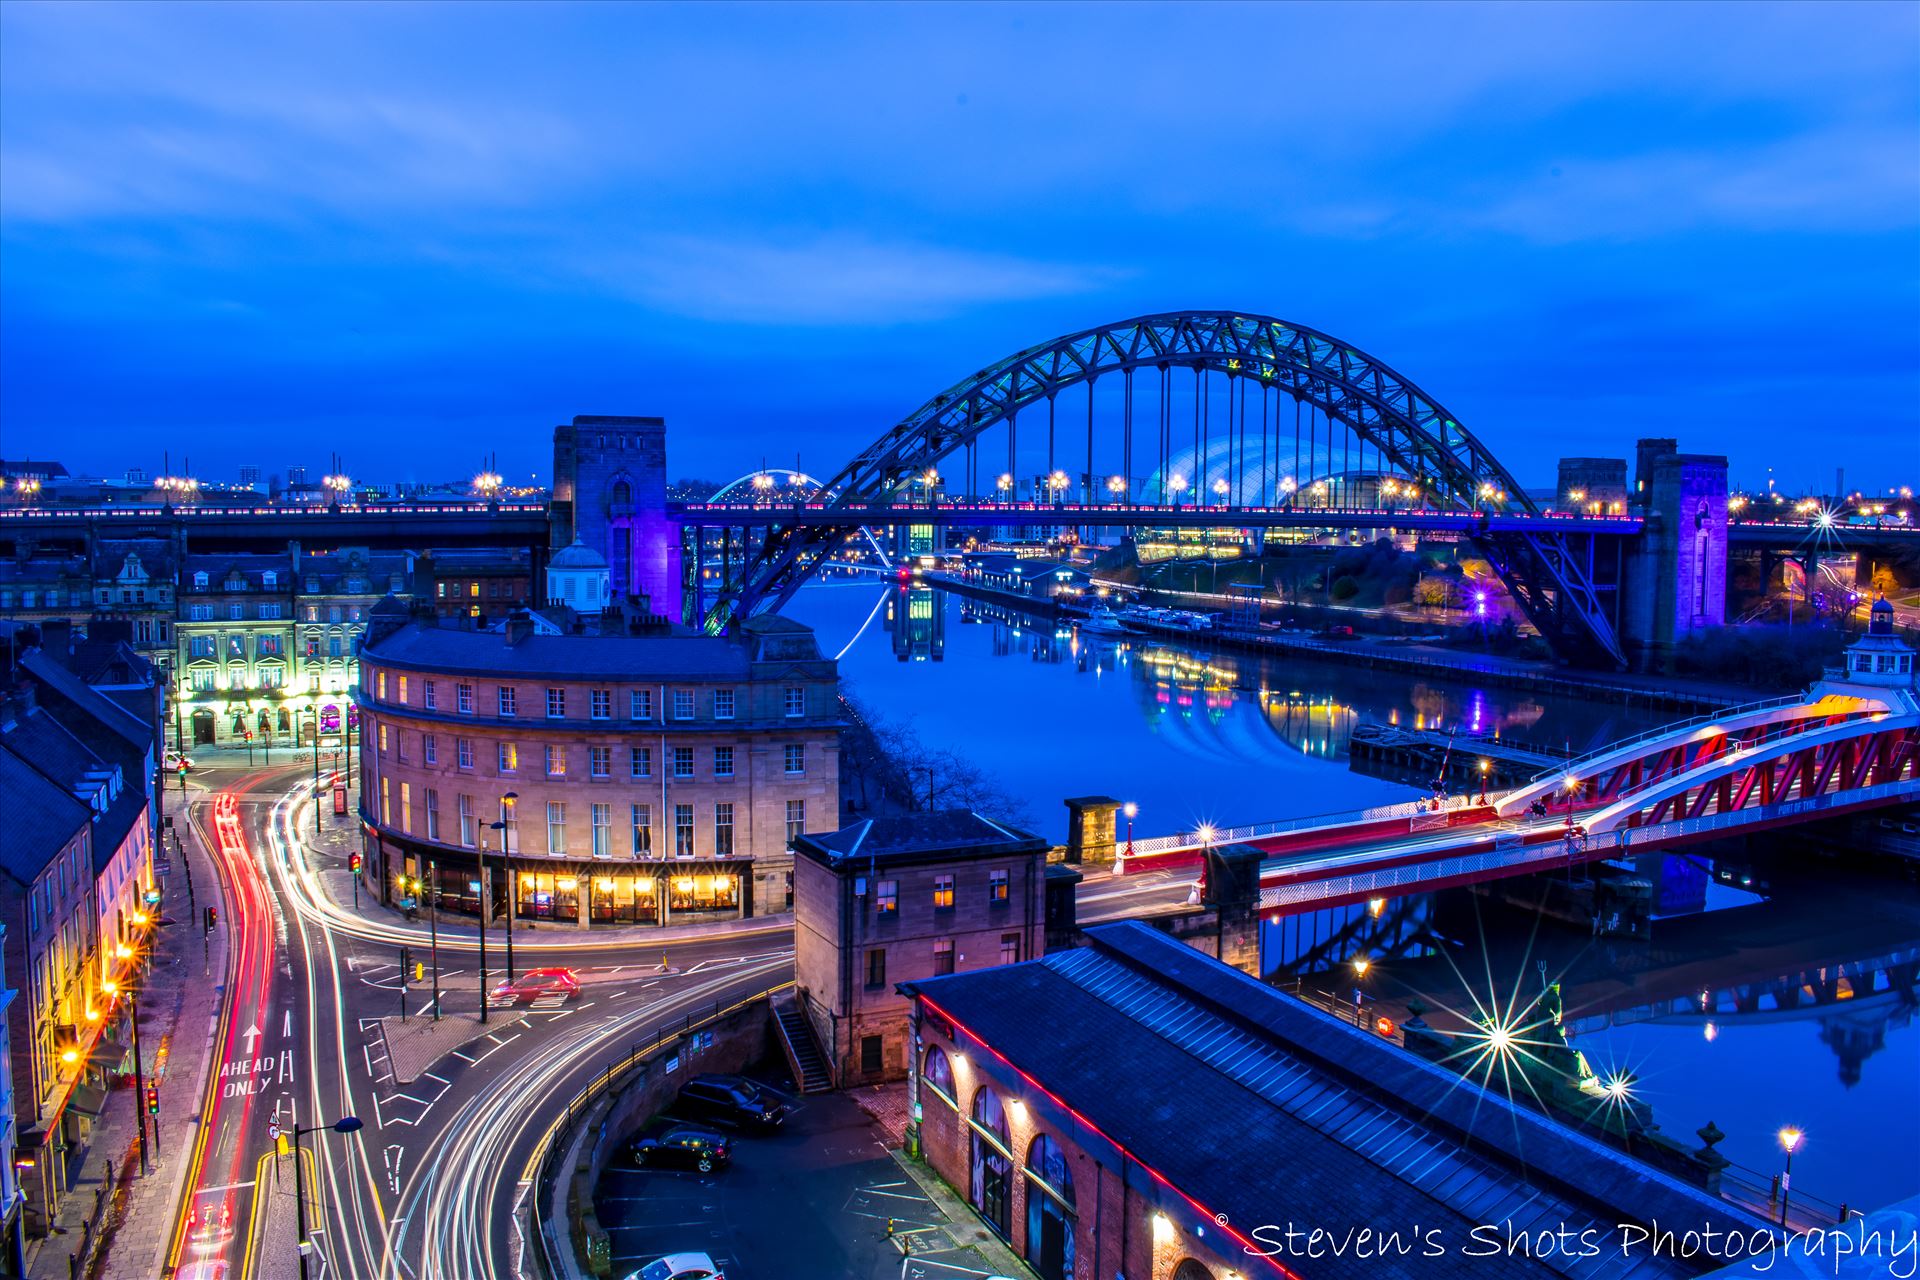 Swing Bridge and Tyne Bridge with traffic on the quayside - A long exposure shot from the high level bridge in Newcastle, showing the Tyne Bridge and Swing Bridge with traffic down on the quayside. by Steven's Shots Photography